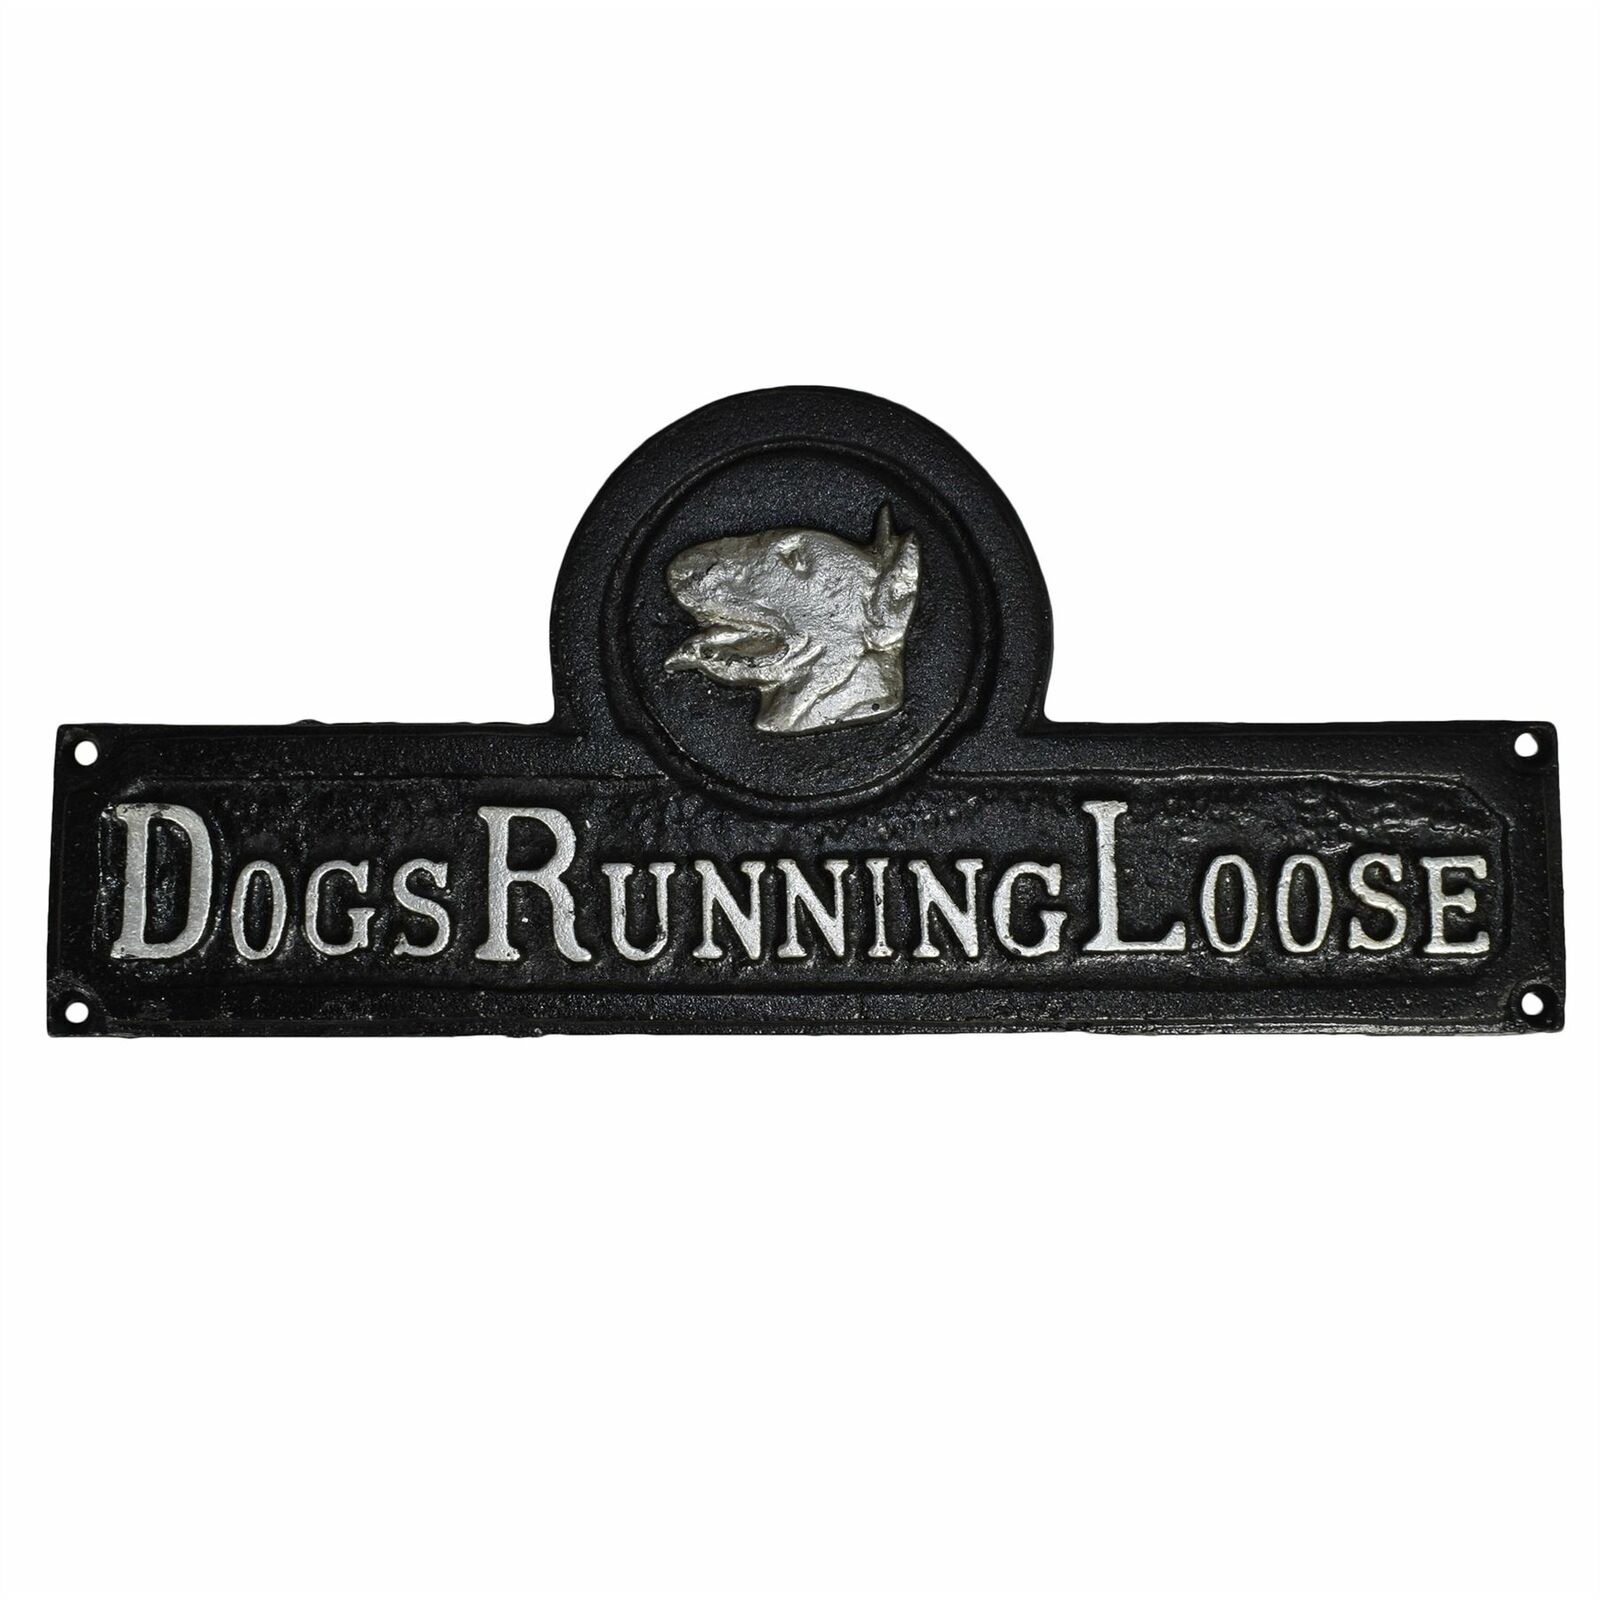 Rustic Gate Plaque in Black and Golden 9.5 x 2.8 Inches; Includes Mounting Hardware Cast Iron “Caution Dog Running Free Gate Sign Plate 